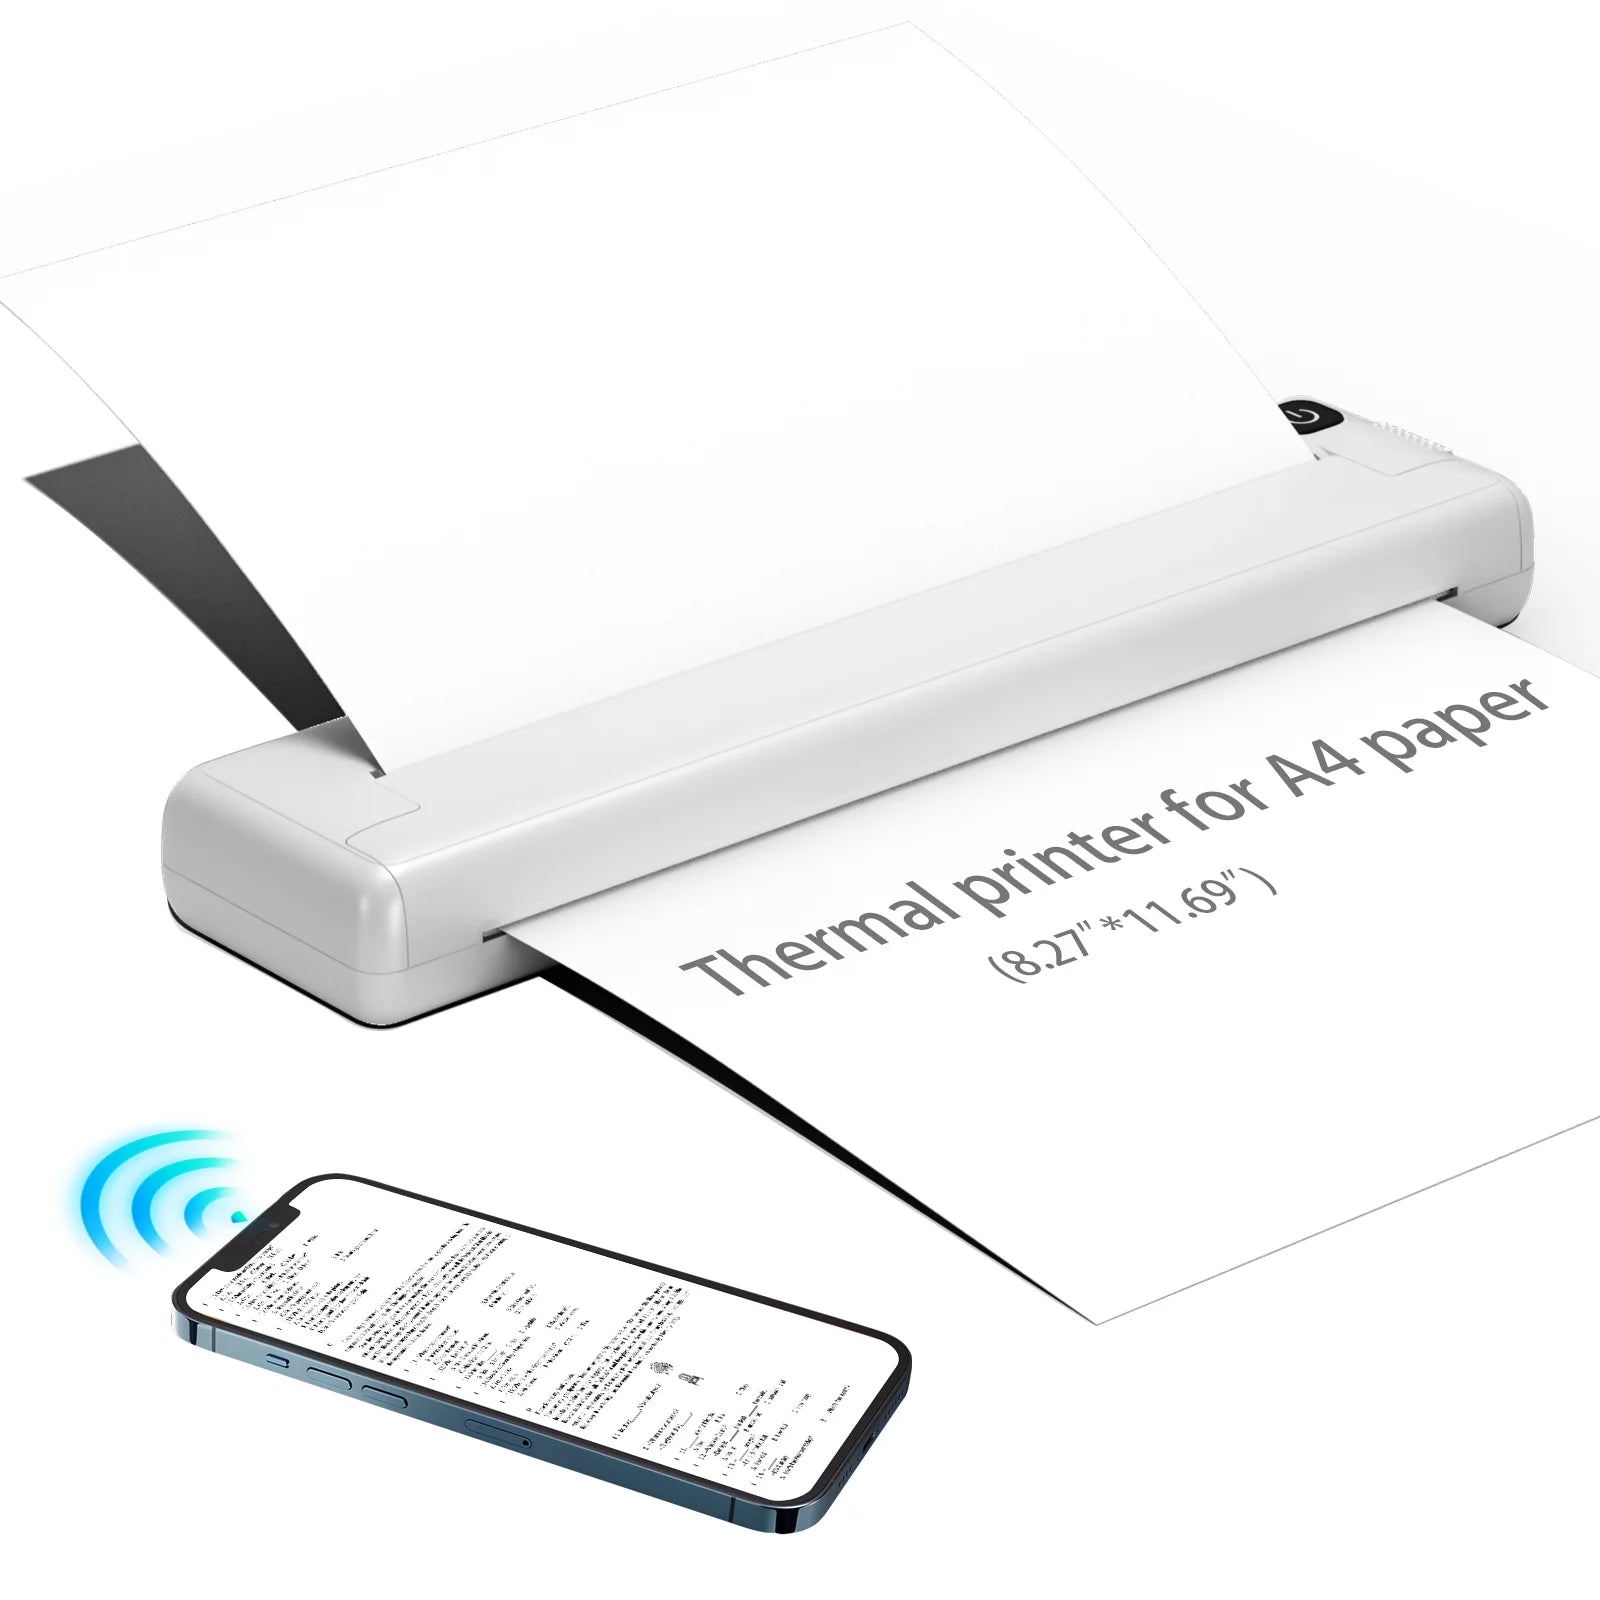 A4 Portable Thermal Printer Bluetooth Wireless Printer Paper Photo Text Document Office Printing For Android iOS Phone Printer